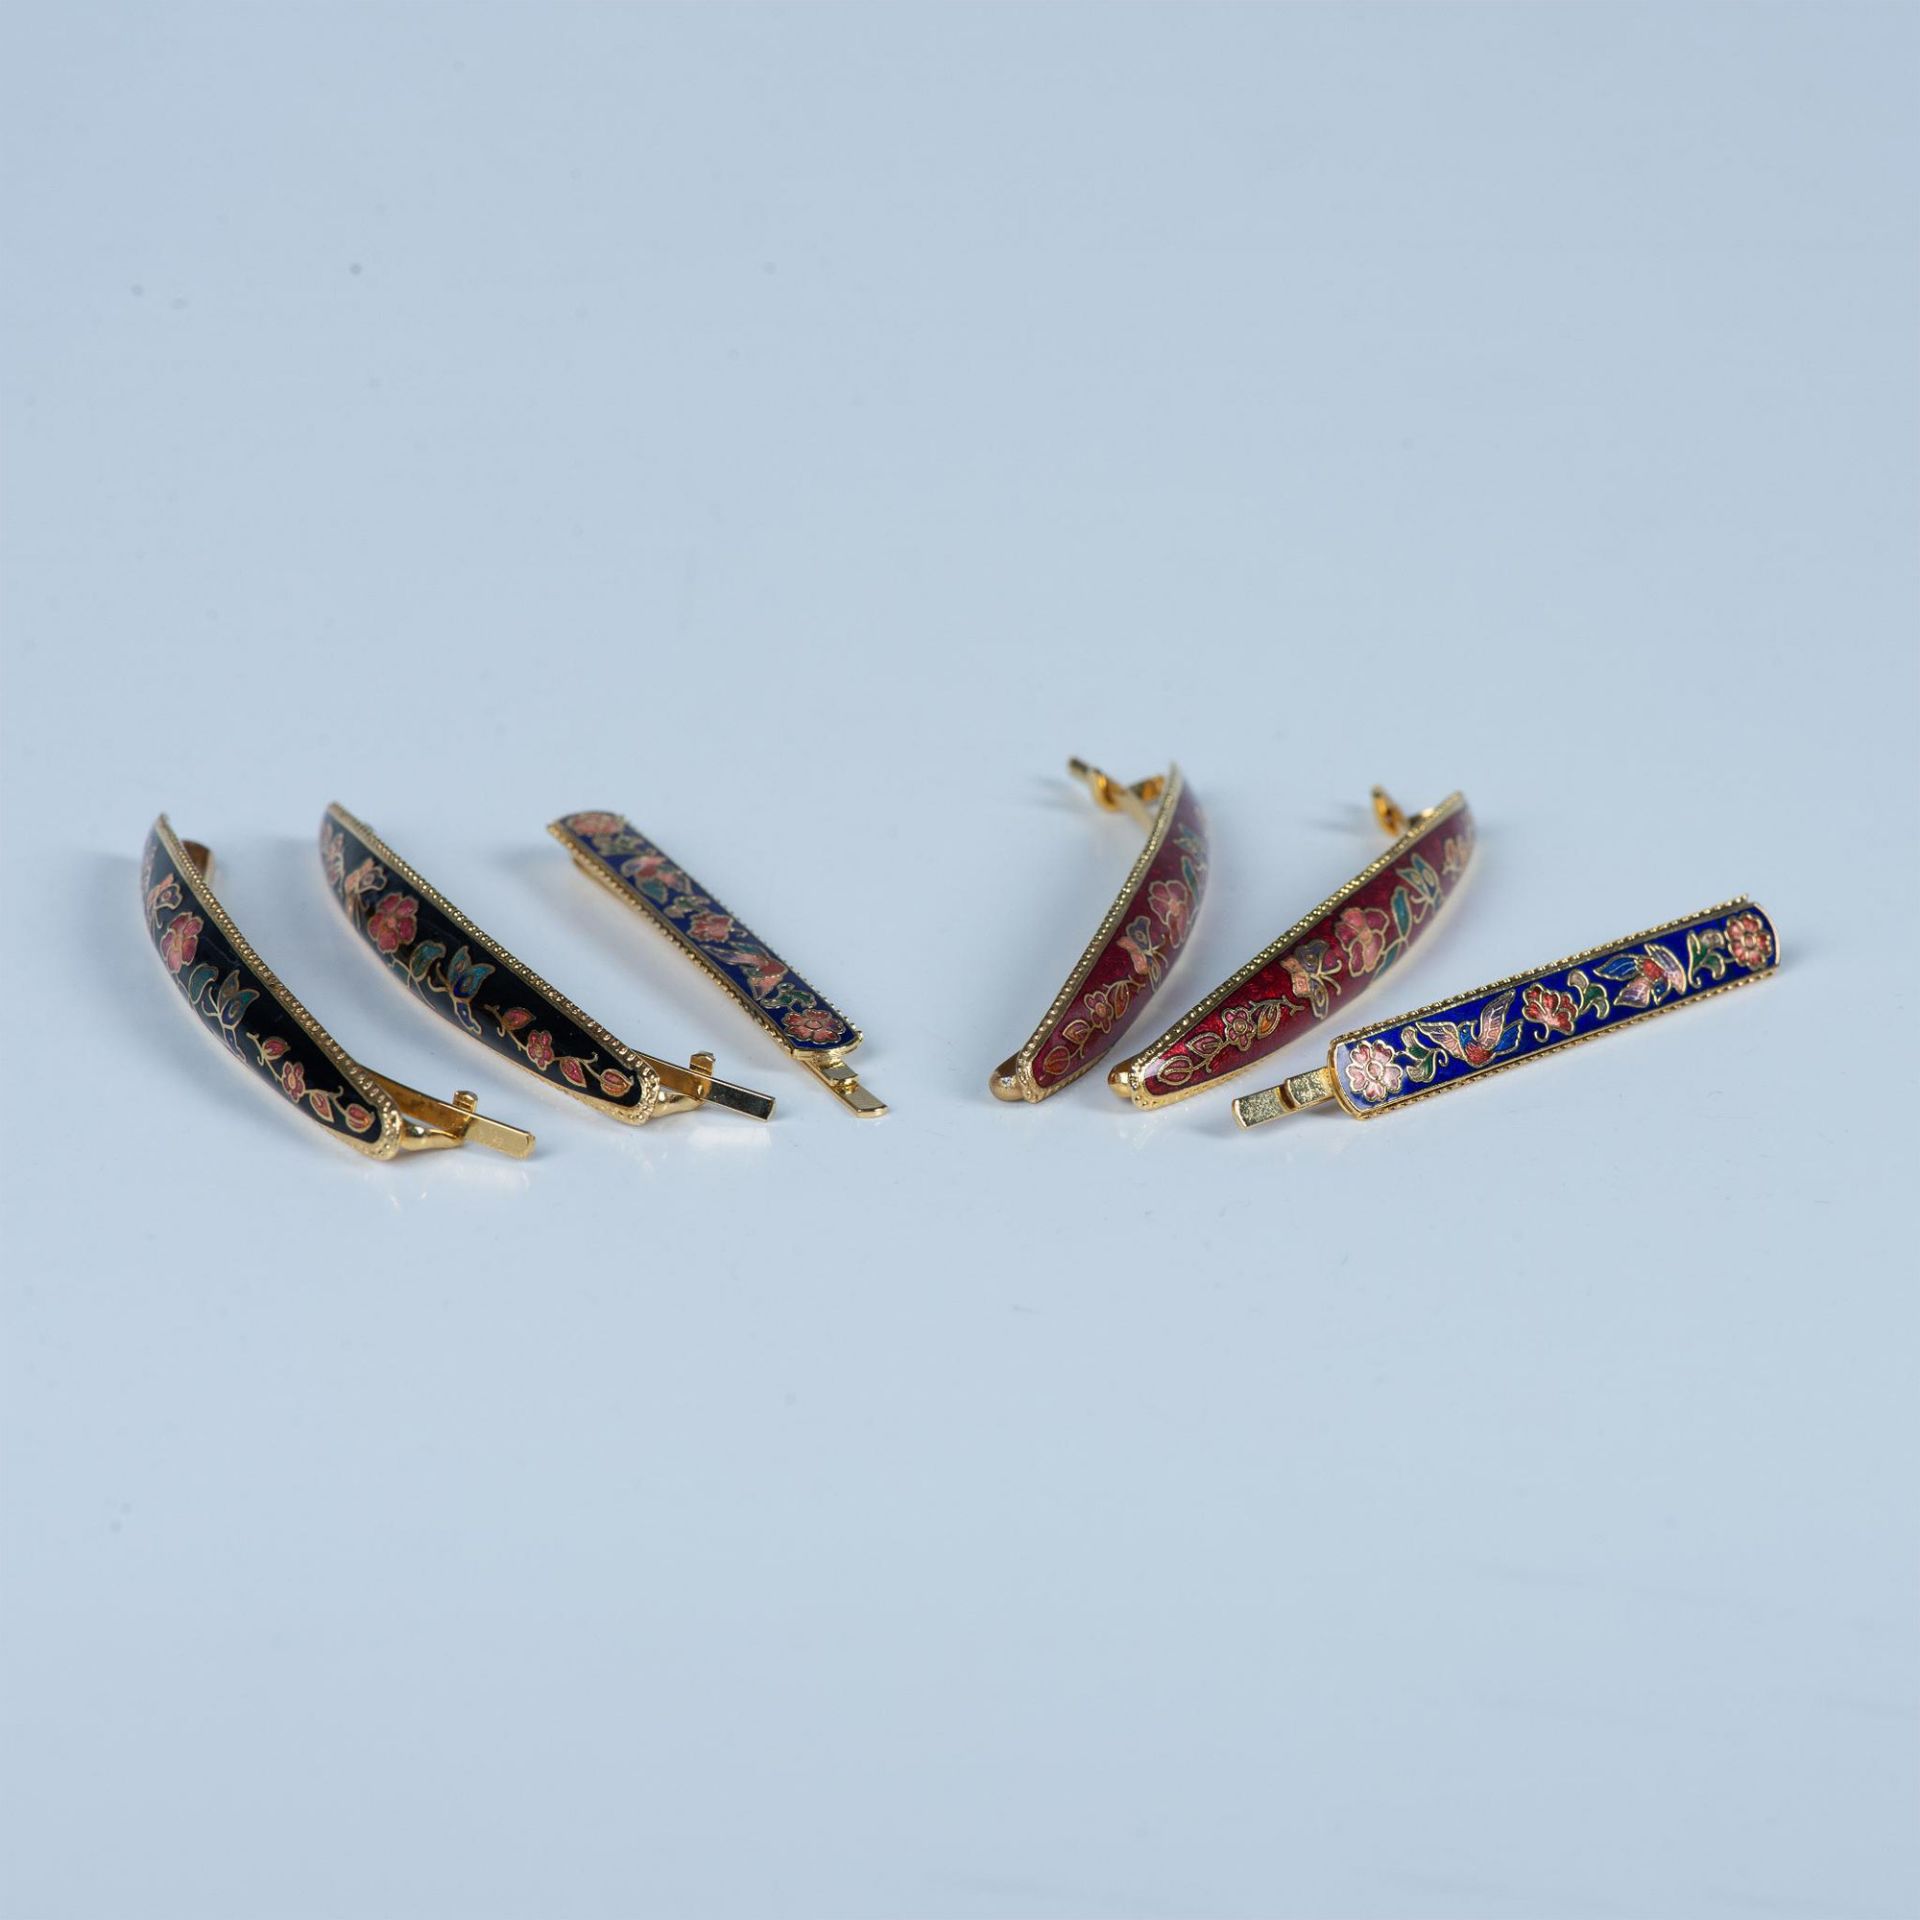 3 Pair of Cloisonne Hair Barrettes - Image 2 of 6